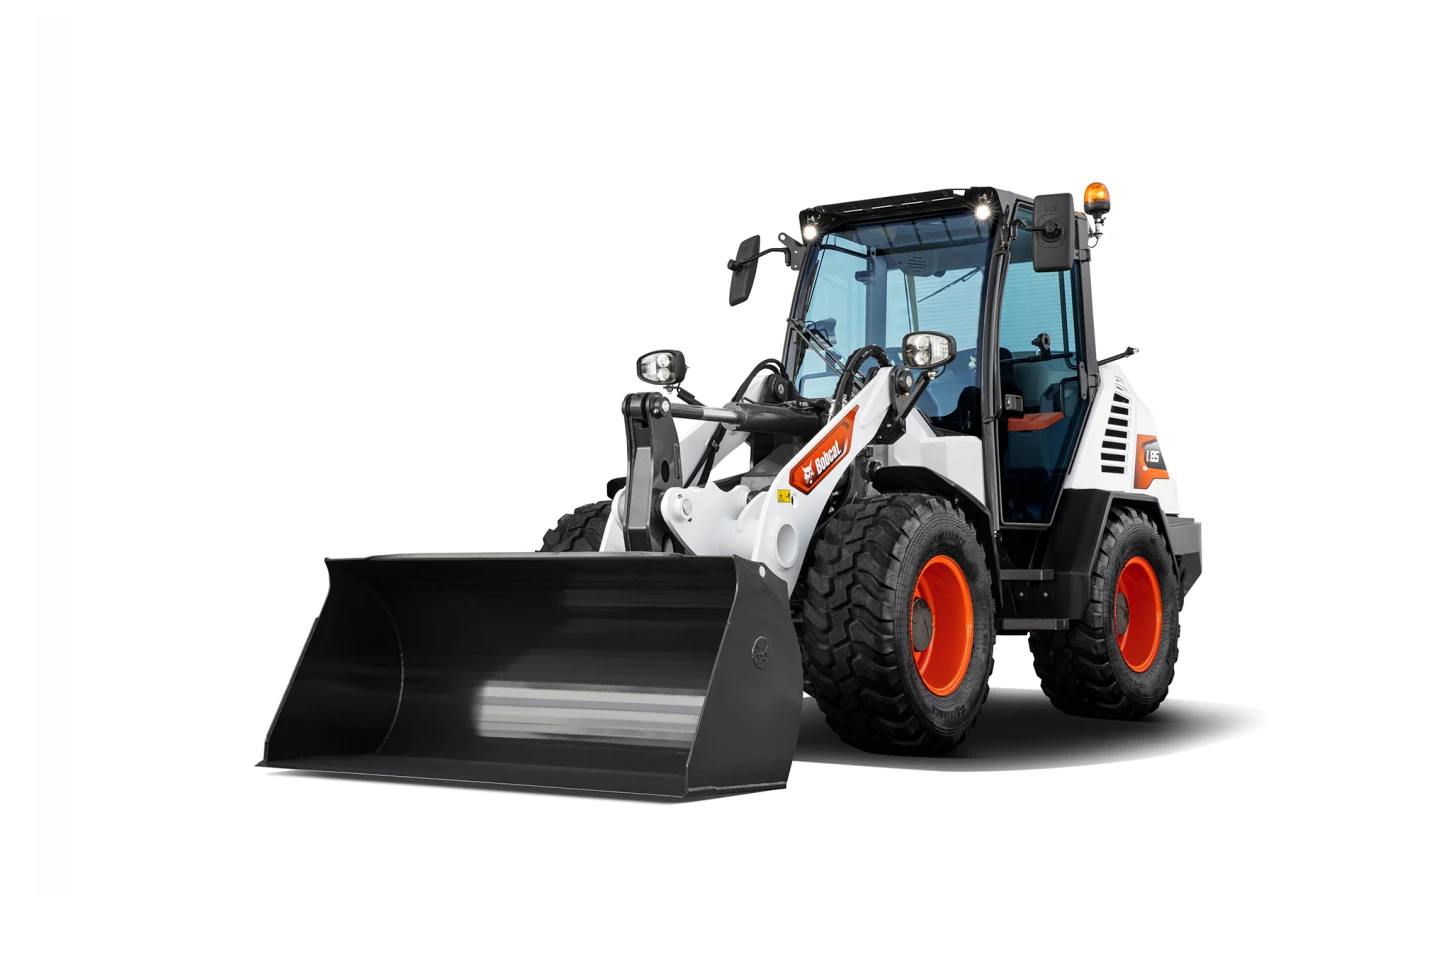 Browse Specs and more for the Bobcat L85 Compact Wheel Loader - Bobcat of Huntsville